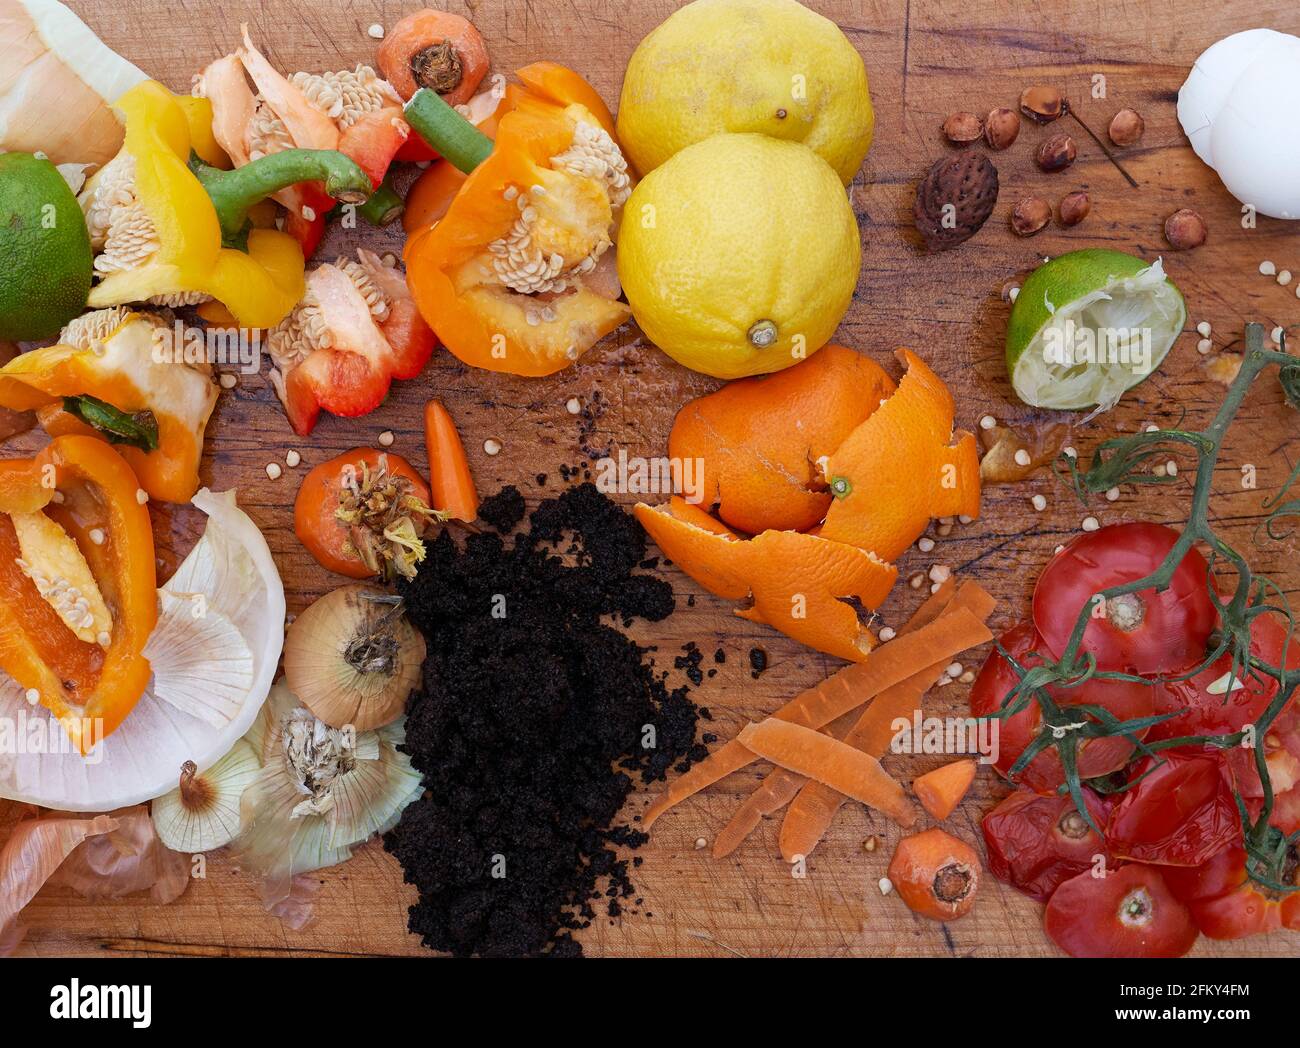 A variety of fruits and vegatable kitchen scraps for composting. Stock Photo